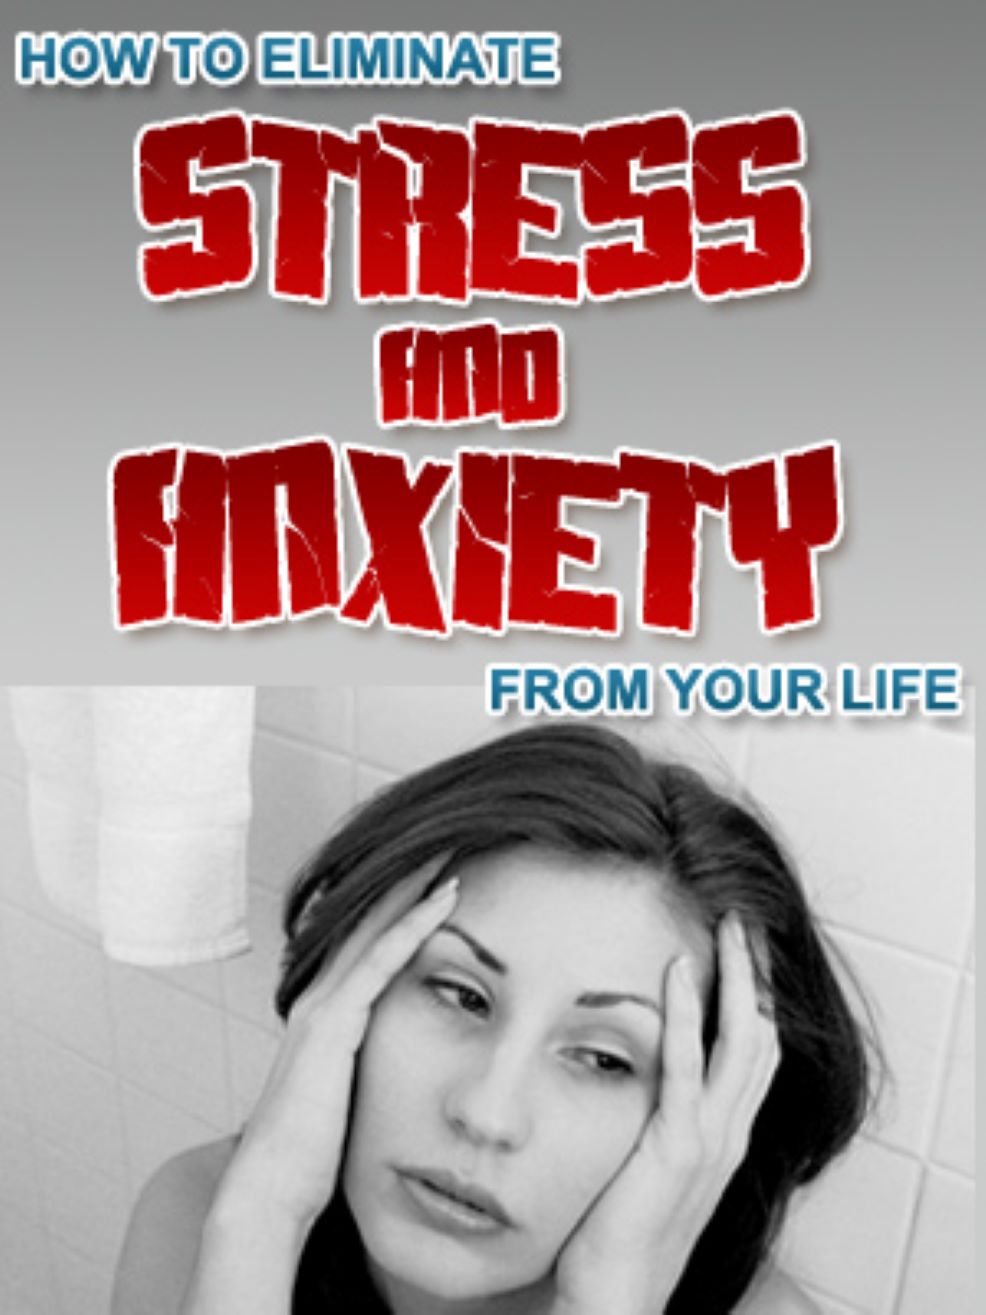 How to Eliminate Stress and Anxiety